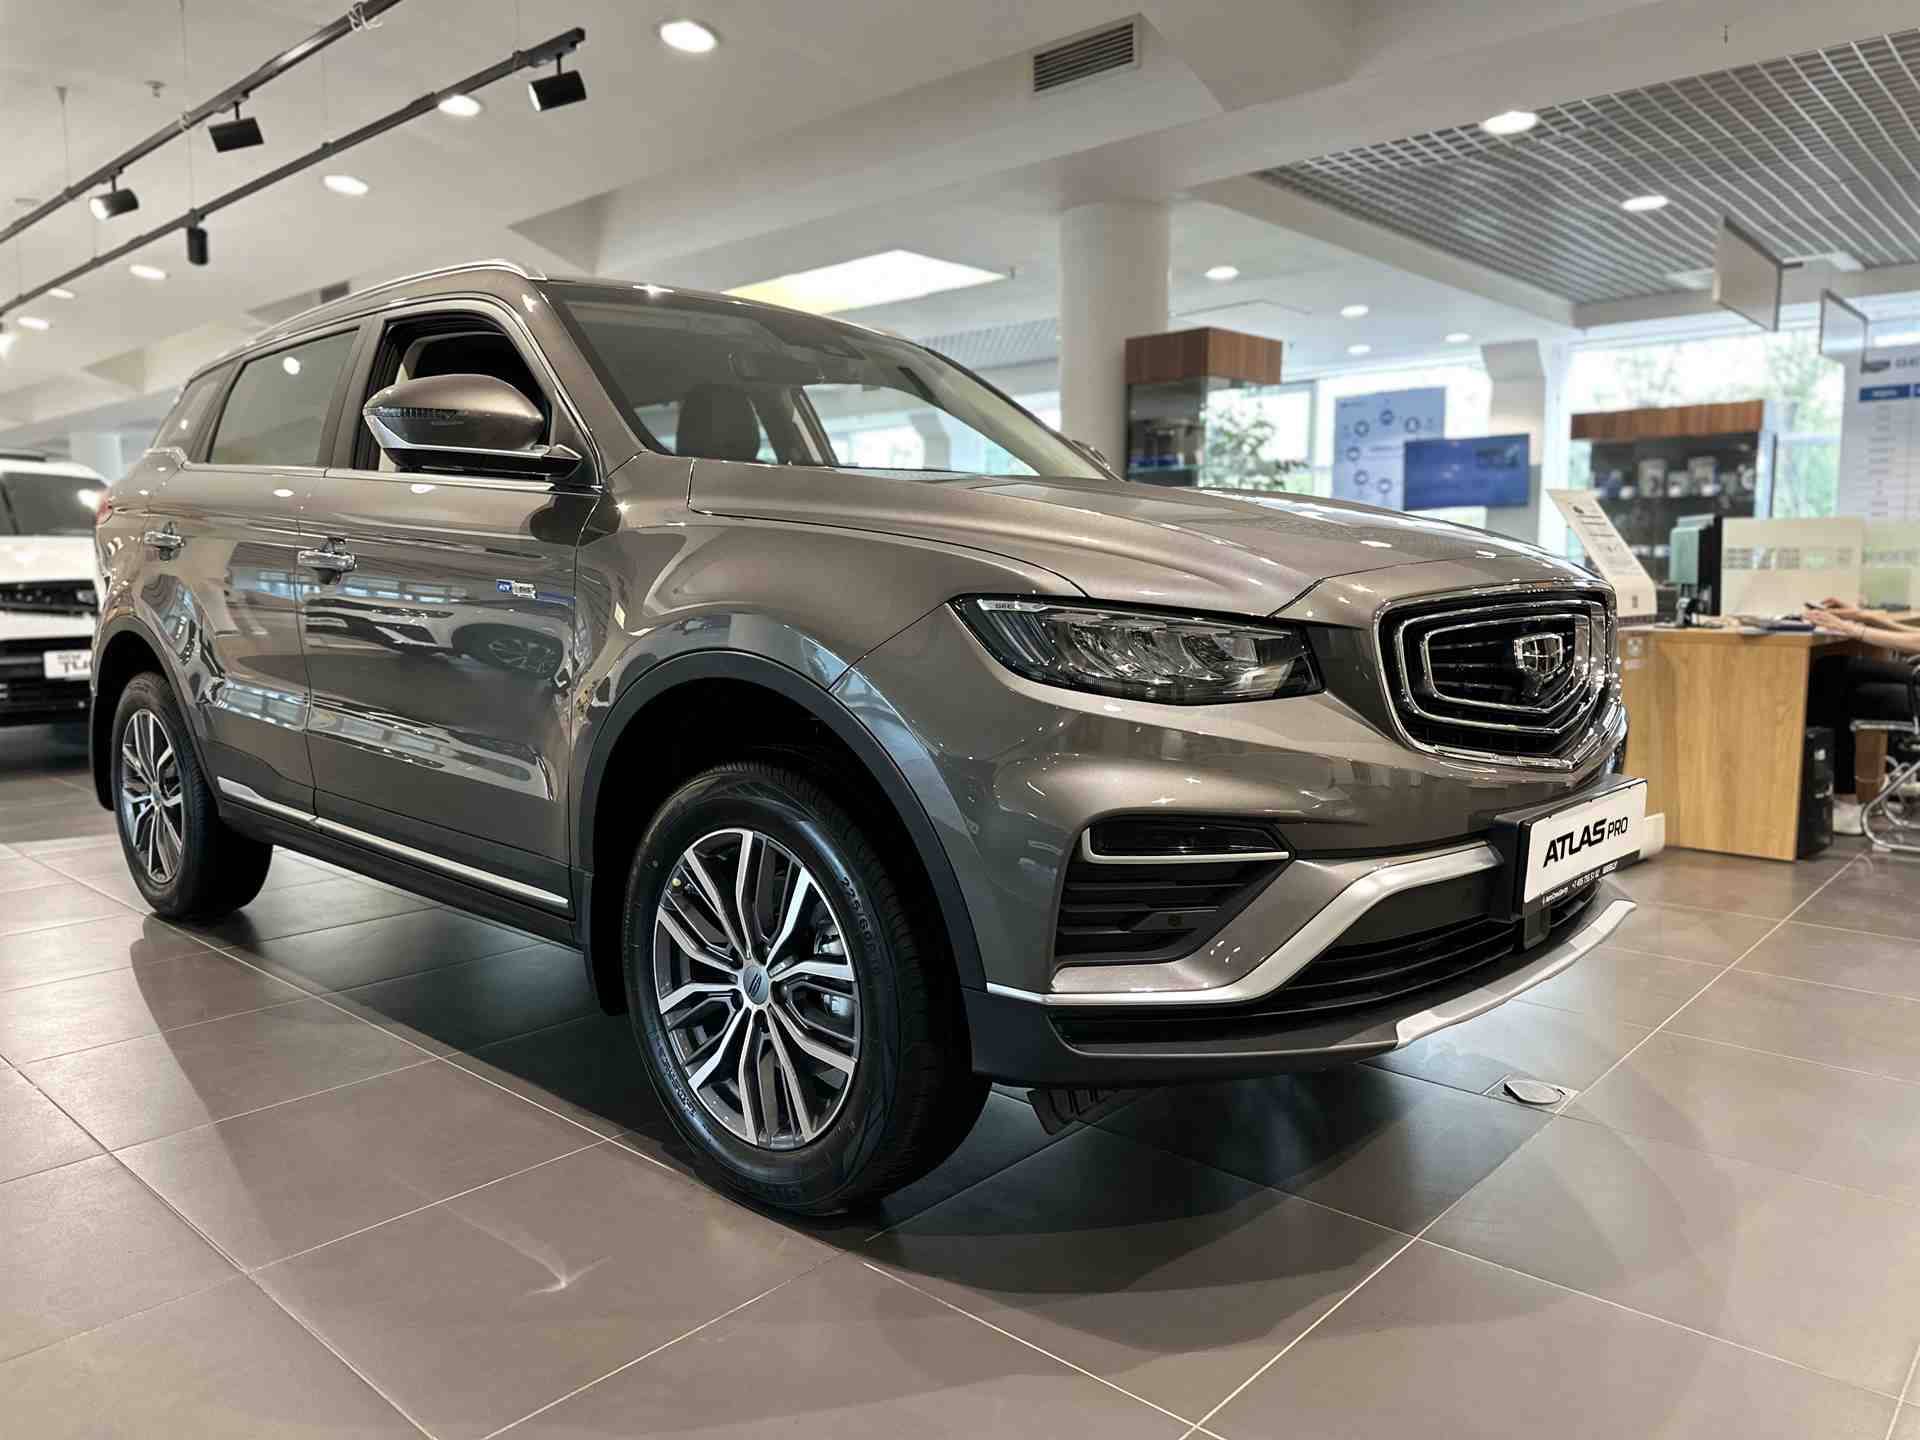 Geely Atlas Pro Flagship 1.5T DCT7 4WD